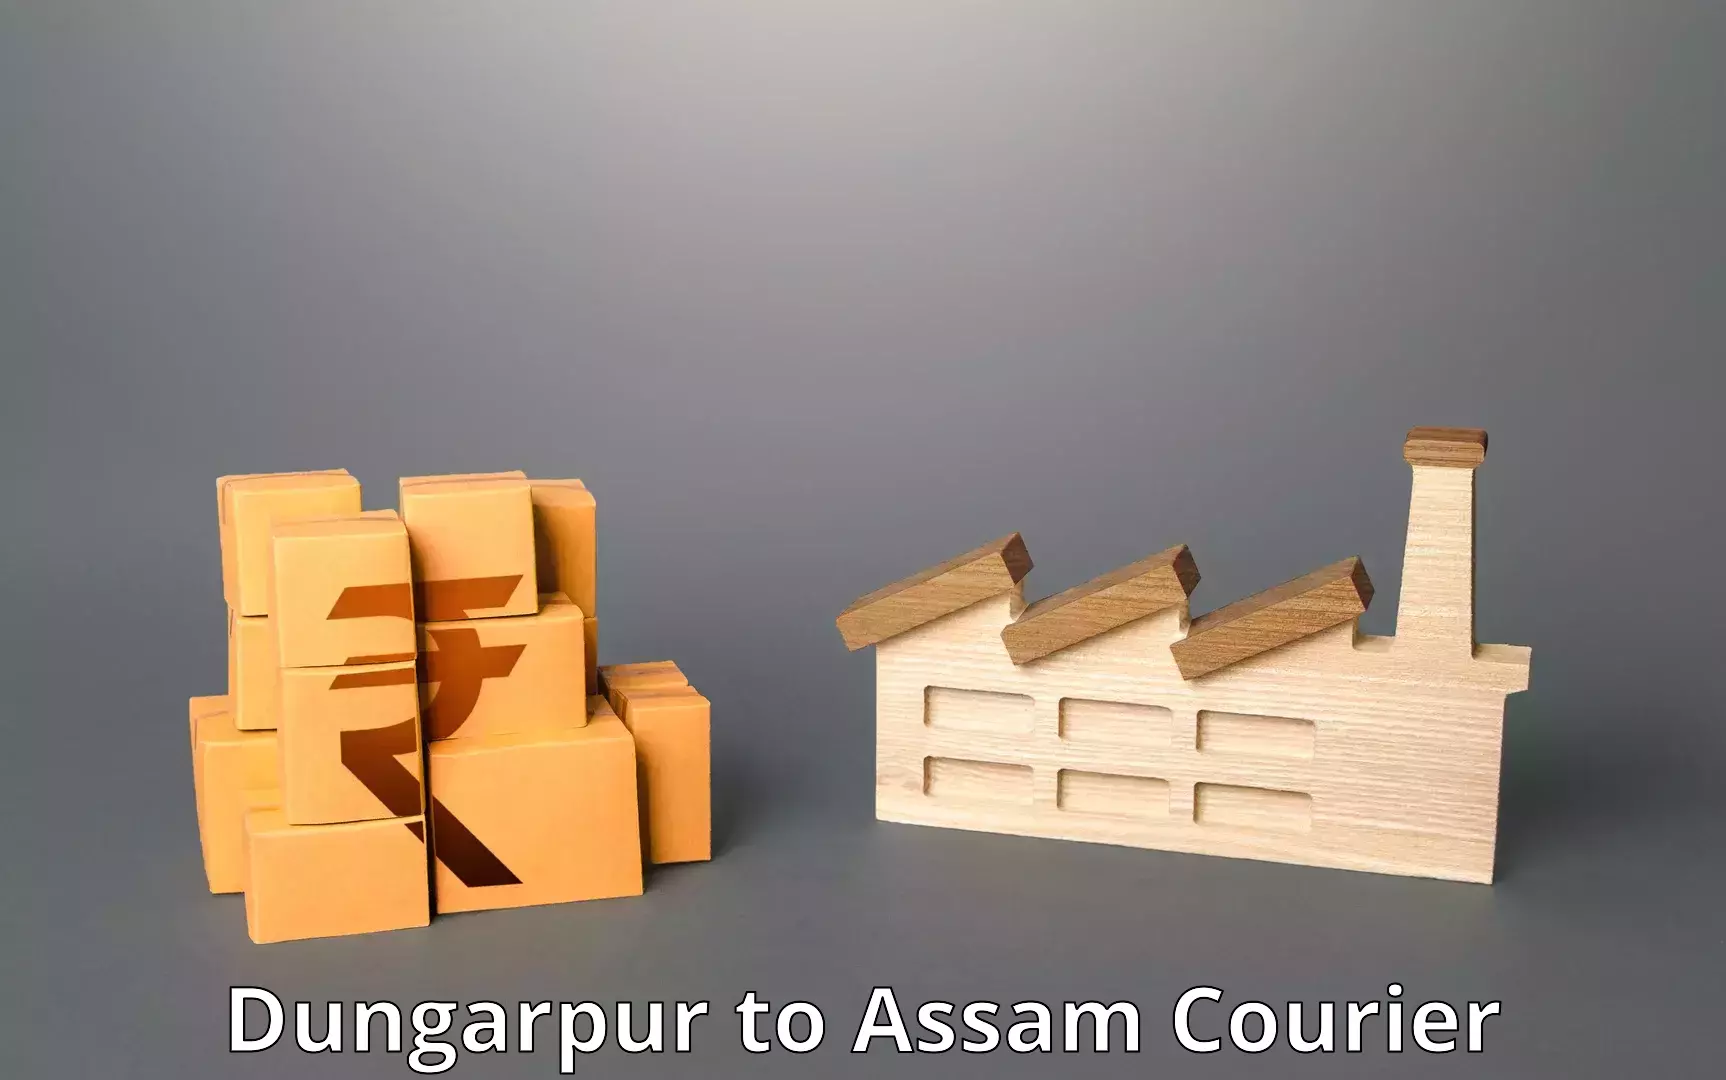 Expedited shipping methods in Dungarpur to Hajo